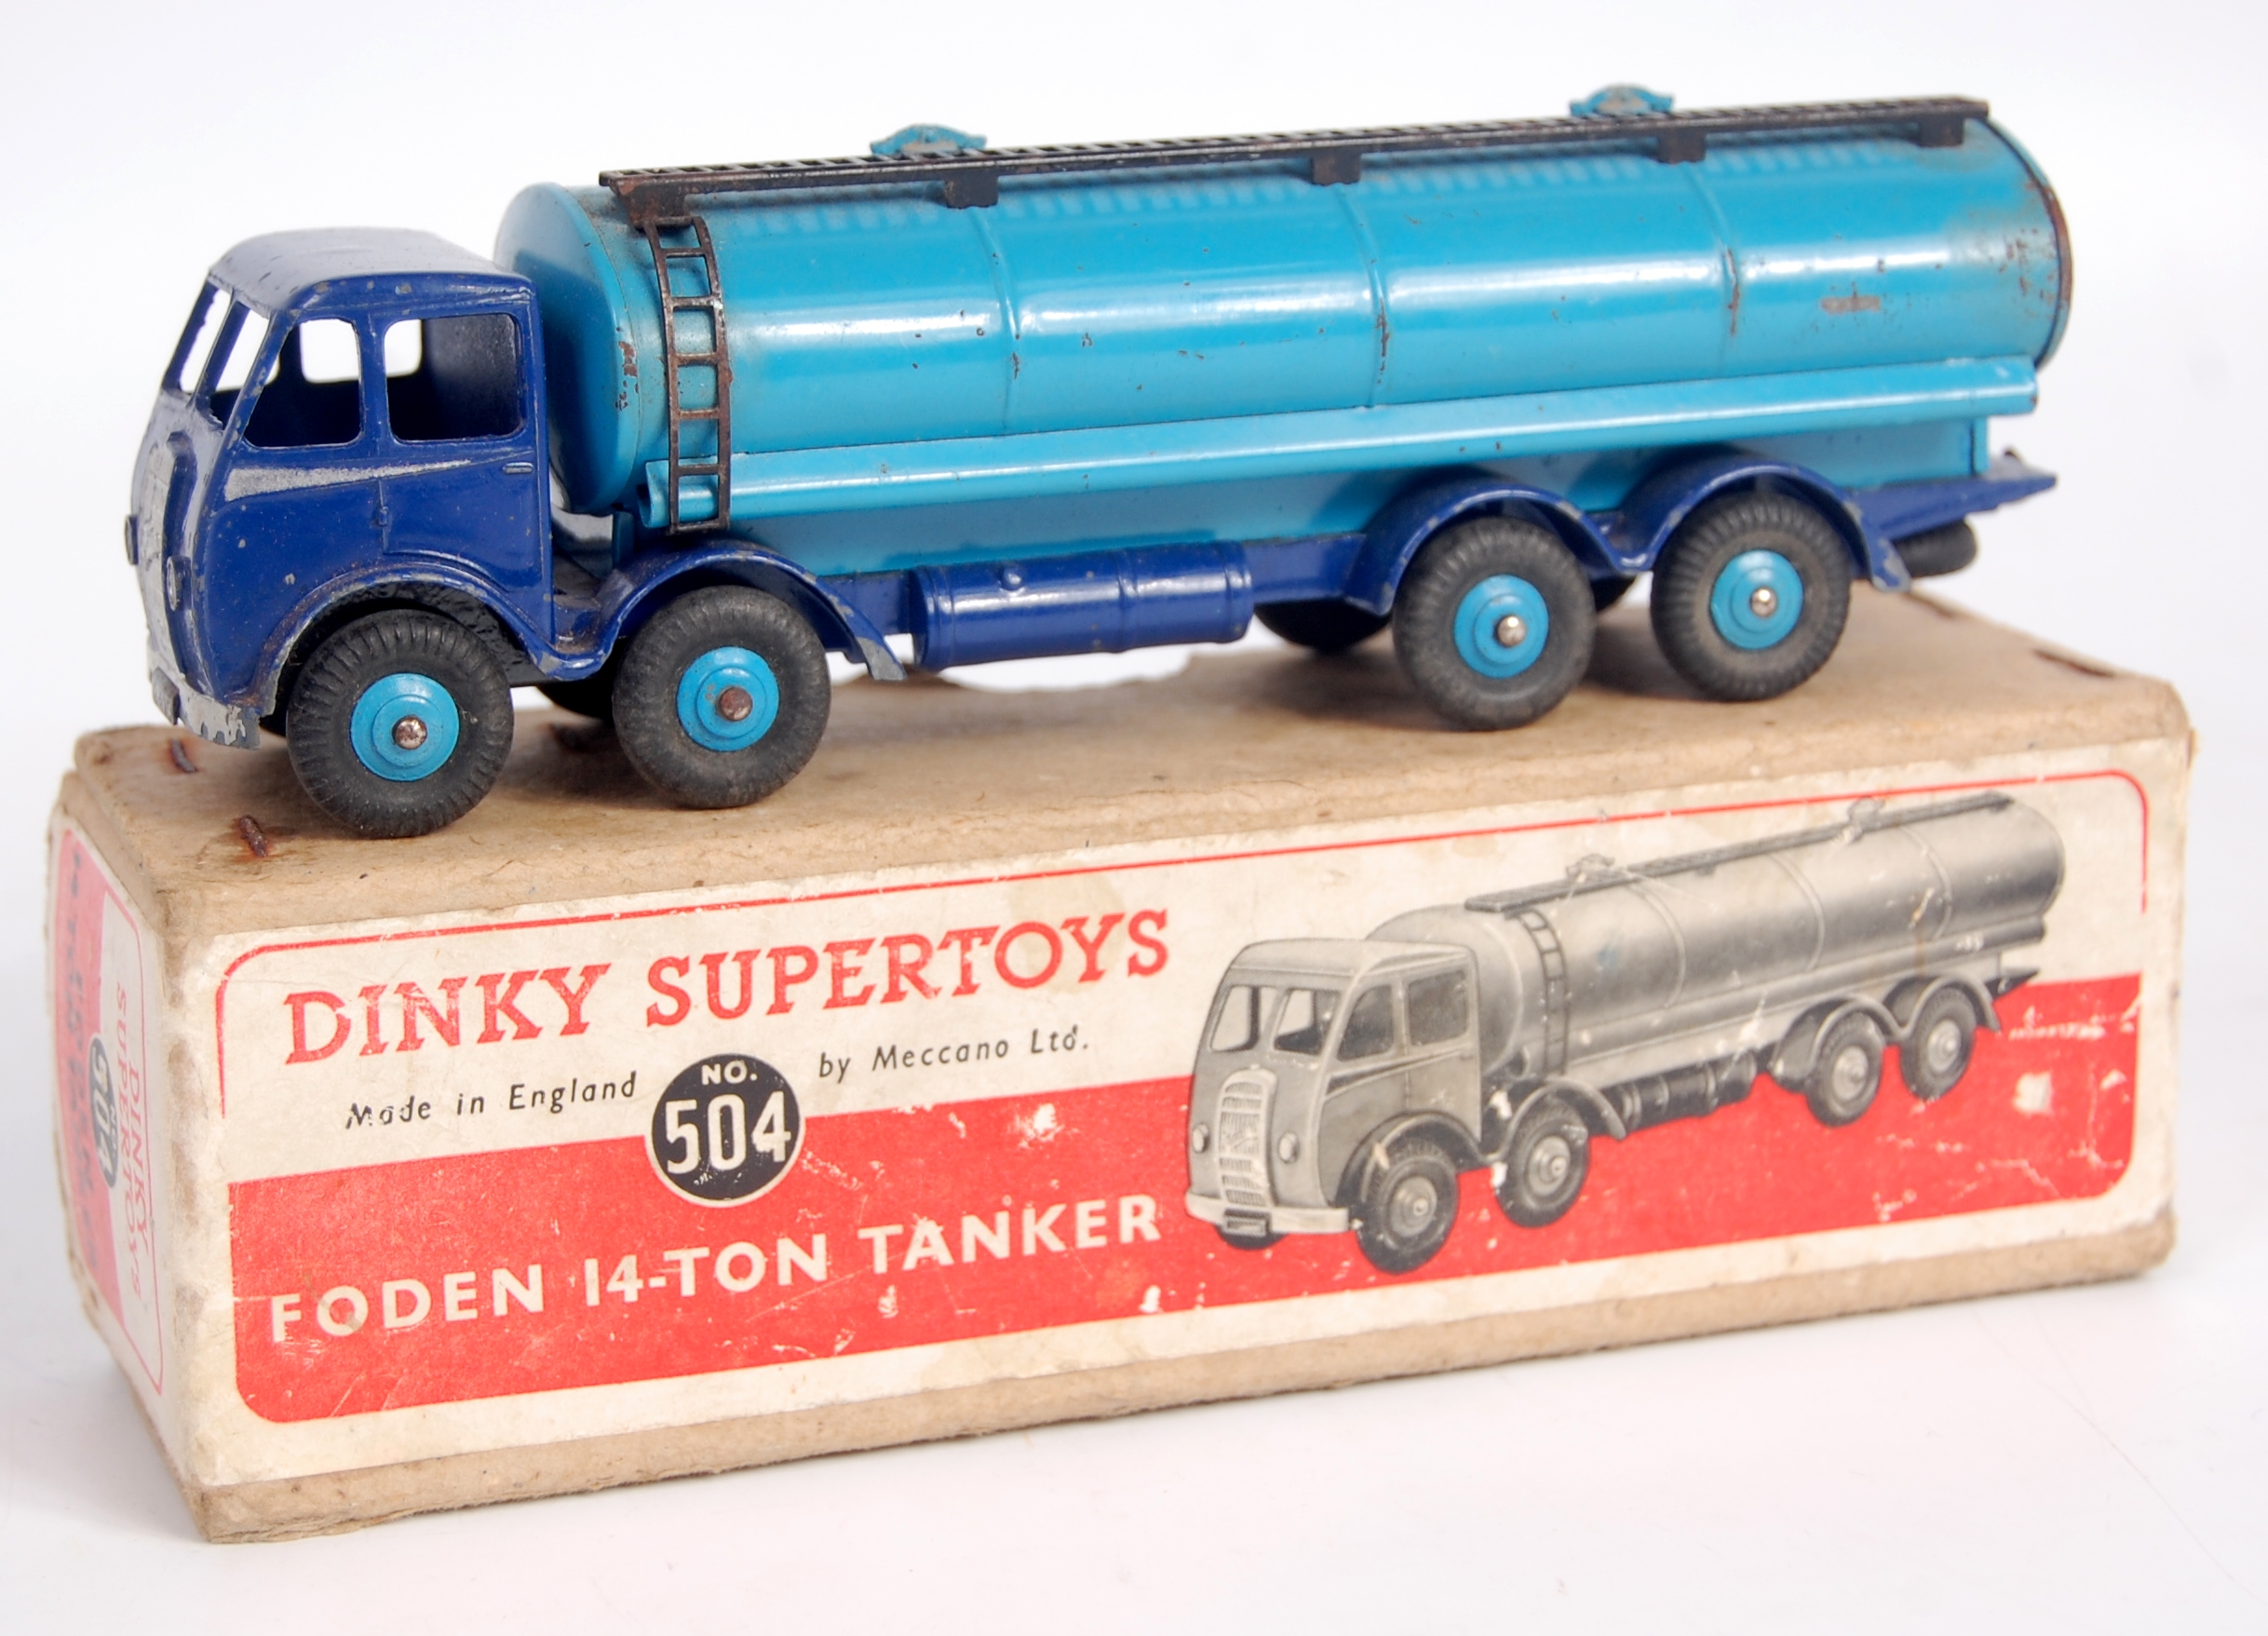 Dinky Toys, 504 Foden 14-ton tanker, dark blue first type cab and chassis with blue tank and blue